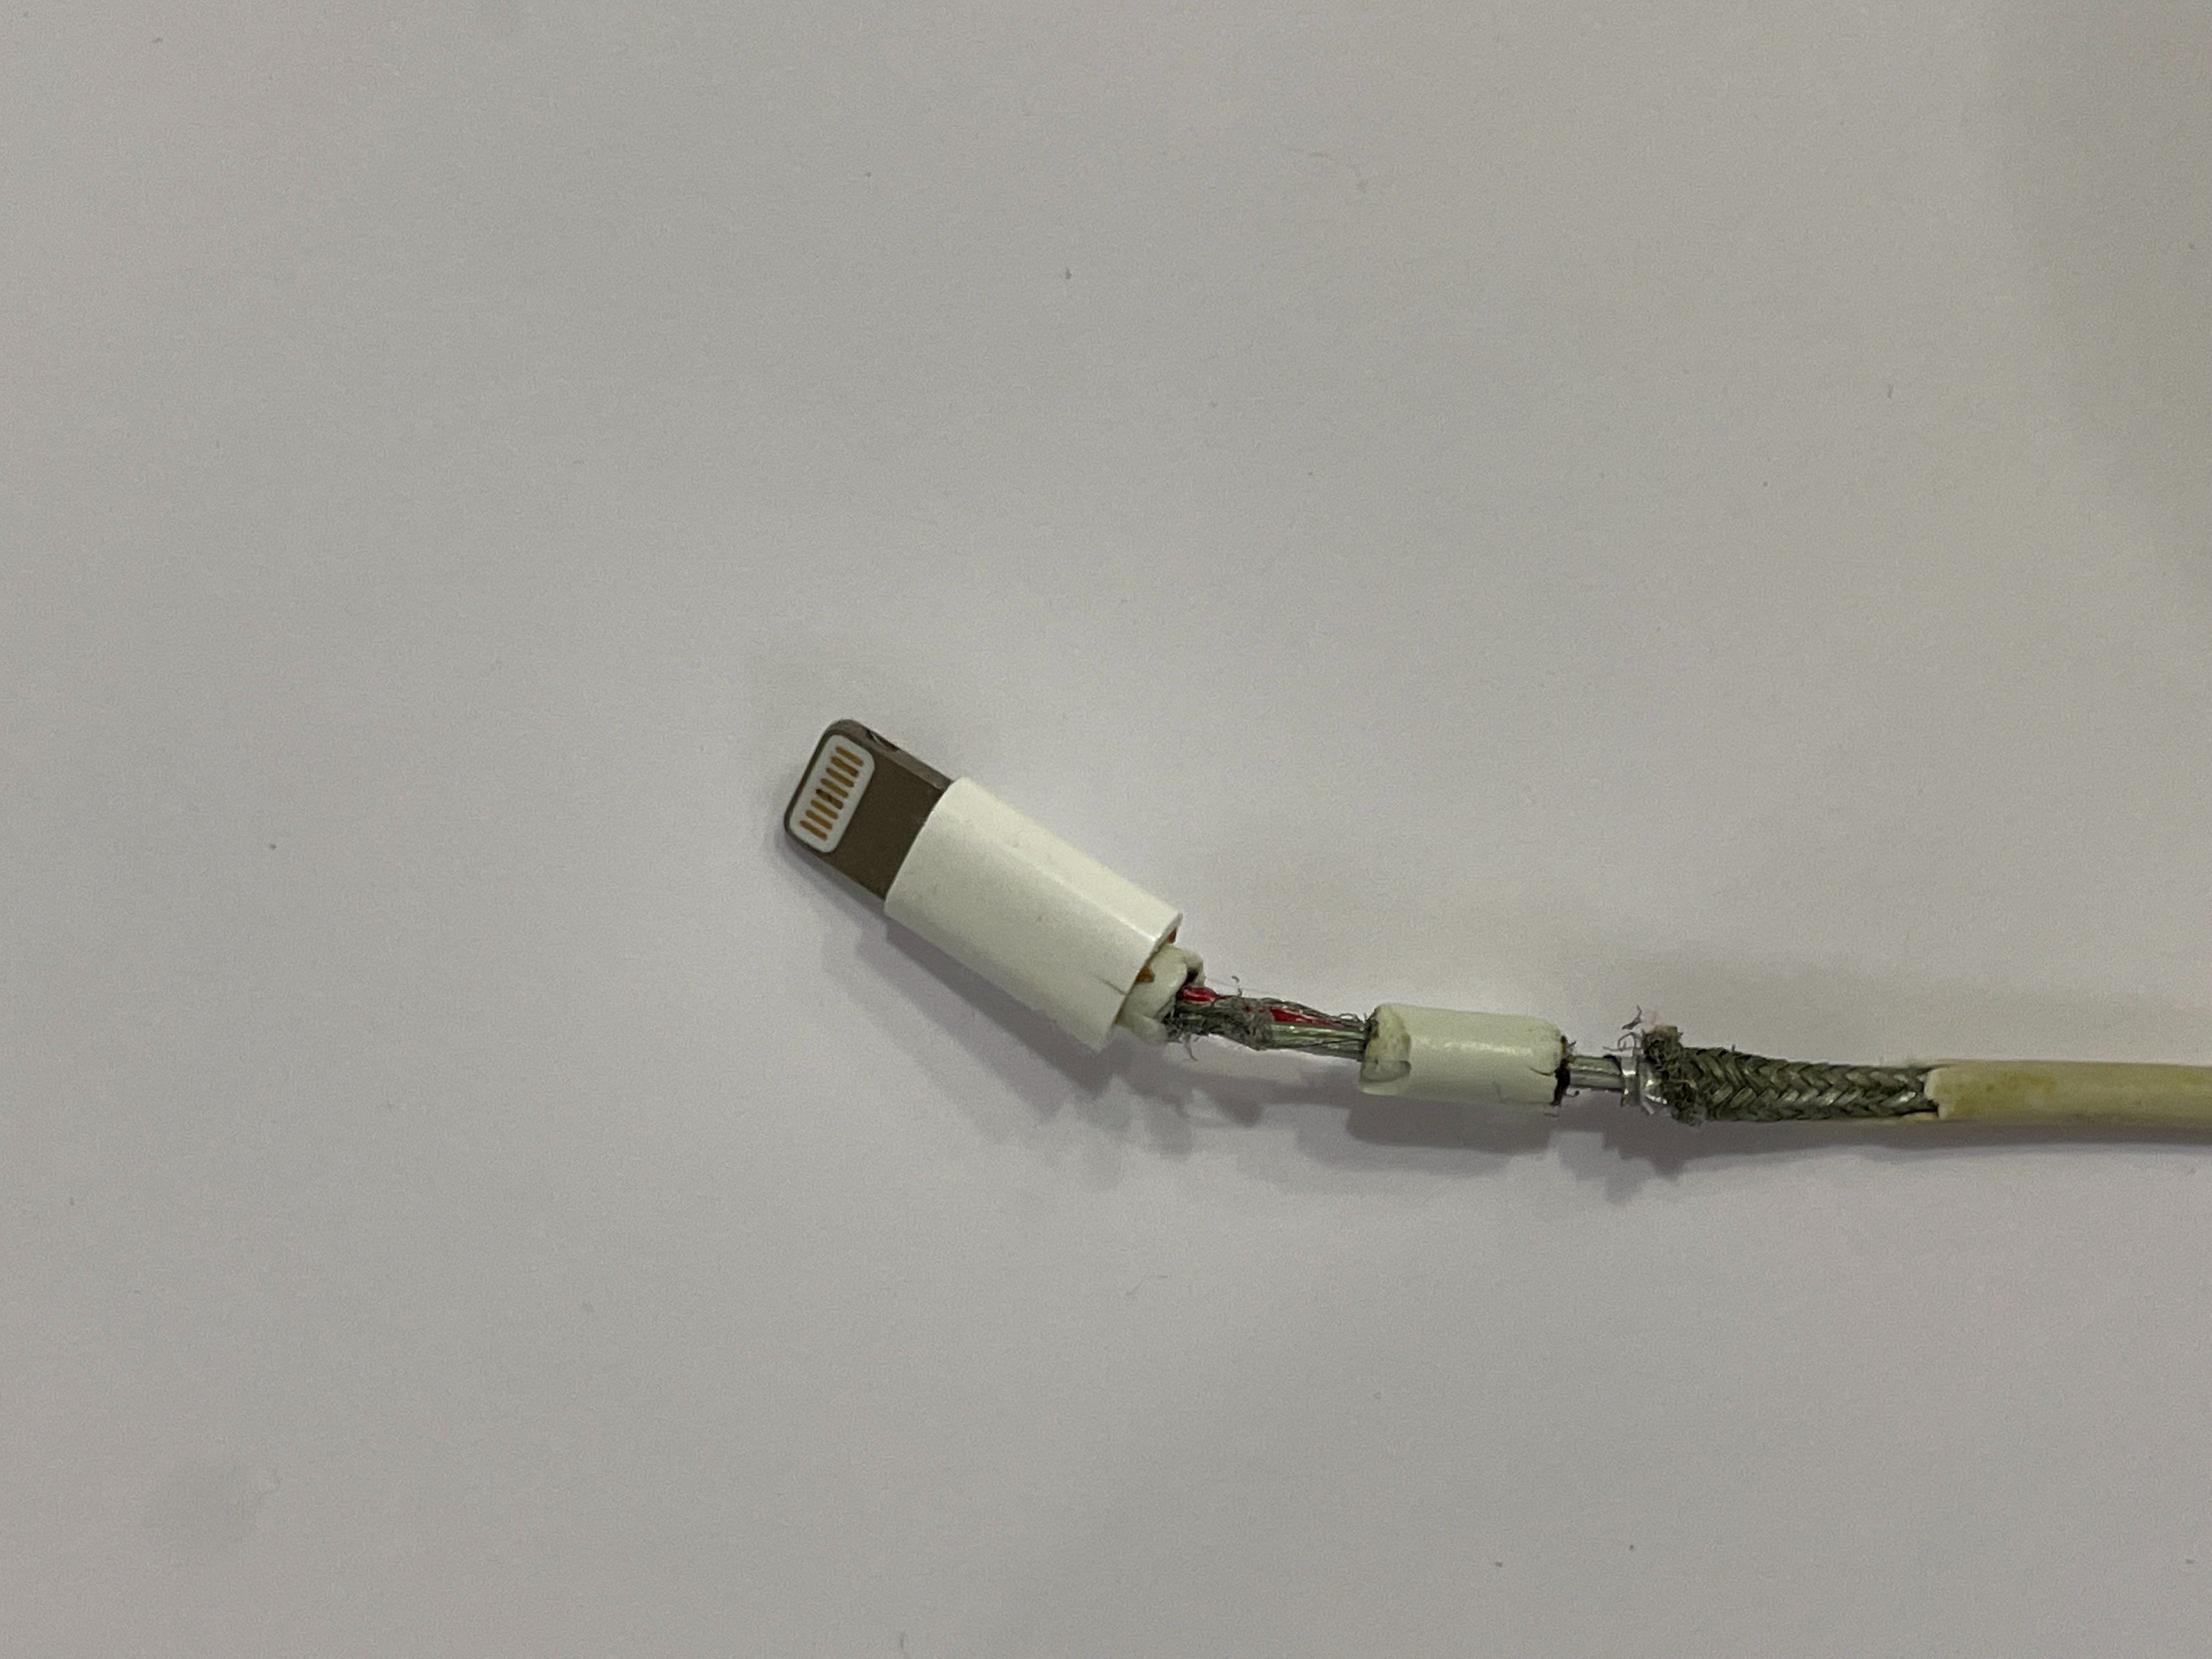 Can a torn iphone charging cable cause a fire? If i wrap electrical tape  around it is that a good fix? Or do i need to get a replacement  immediately? : r/askanelectrician